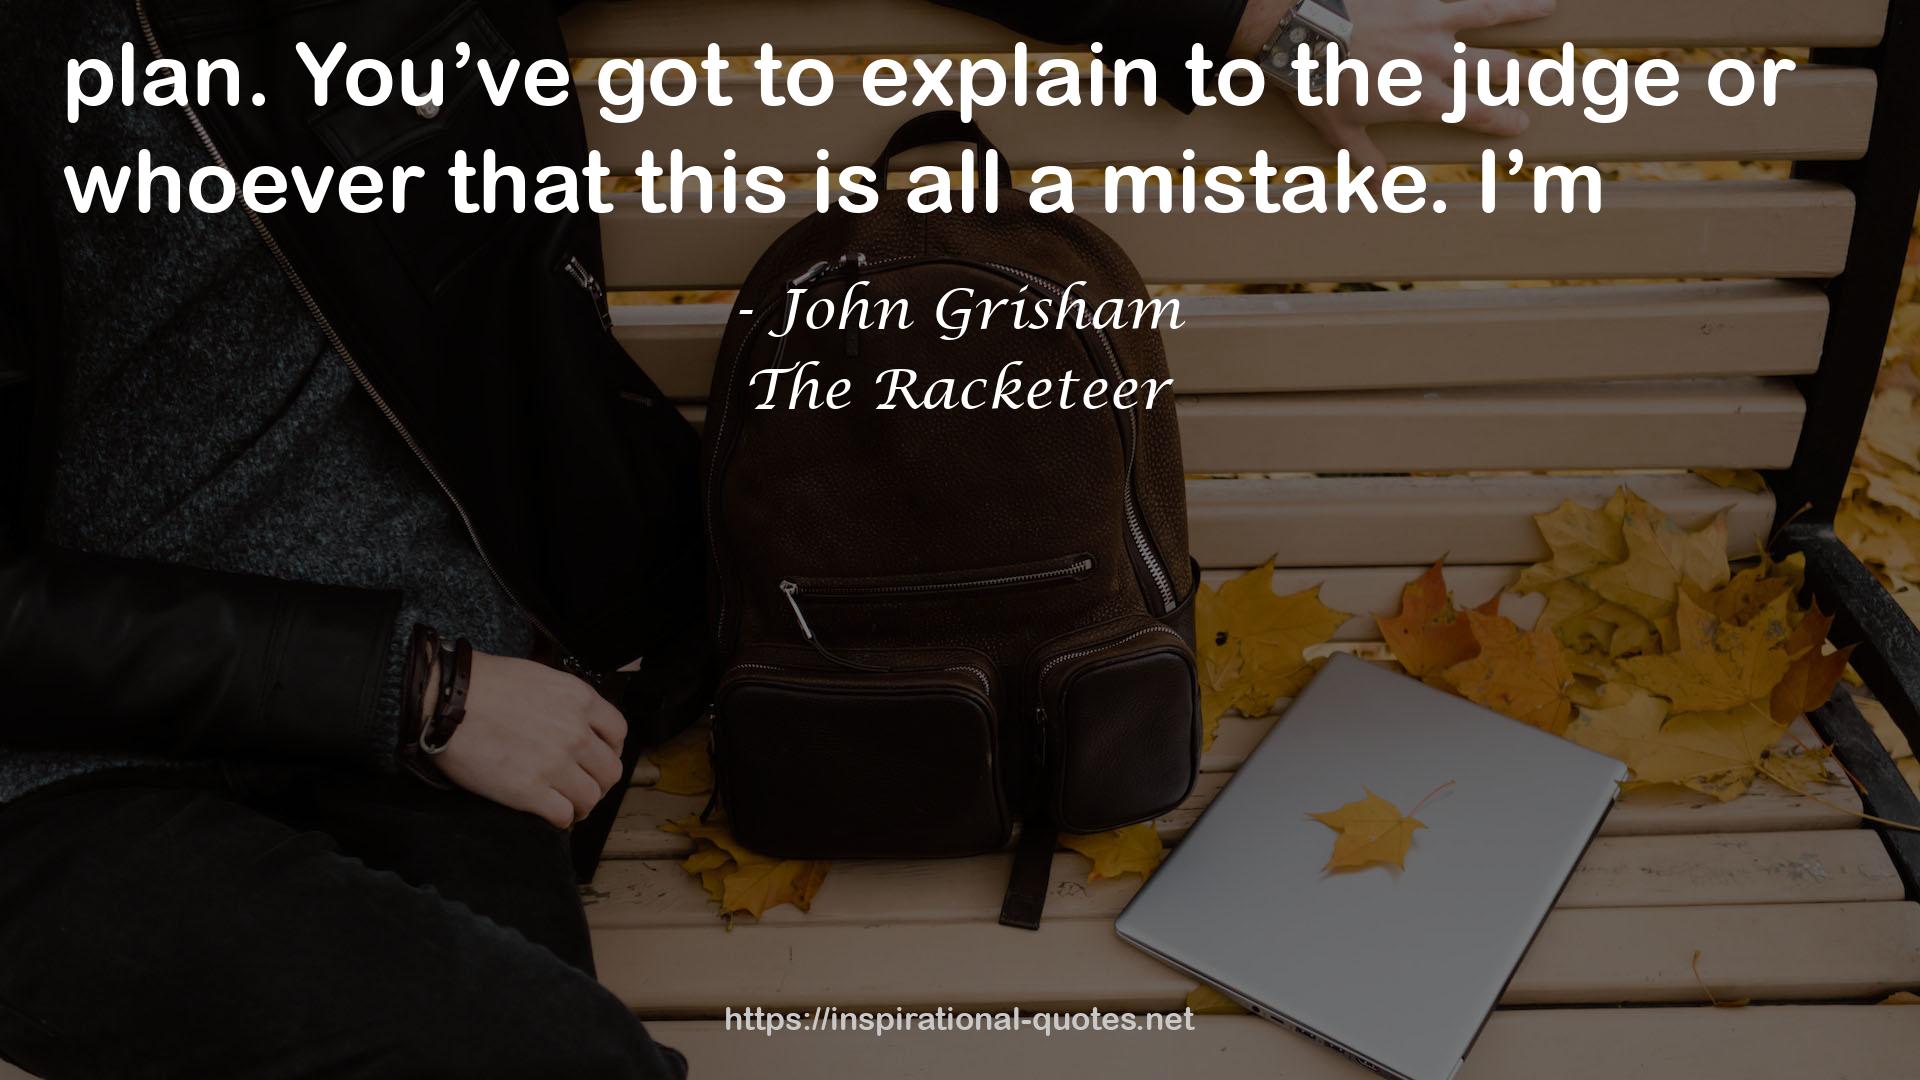 The Racketeer QUOTES